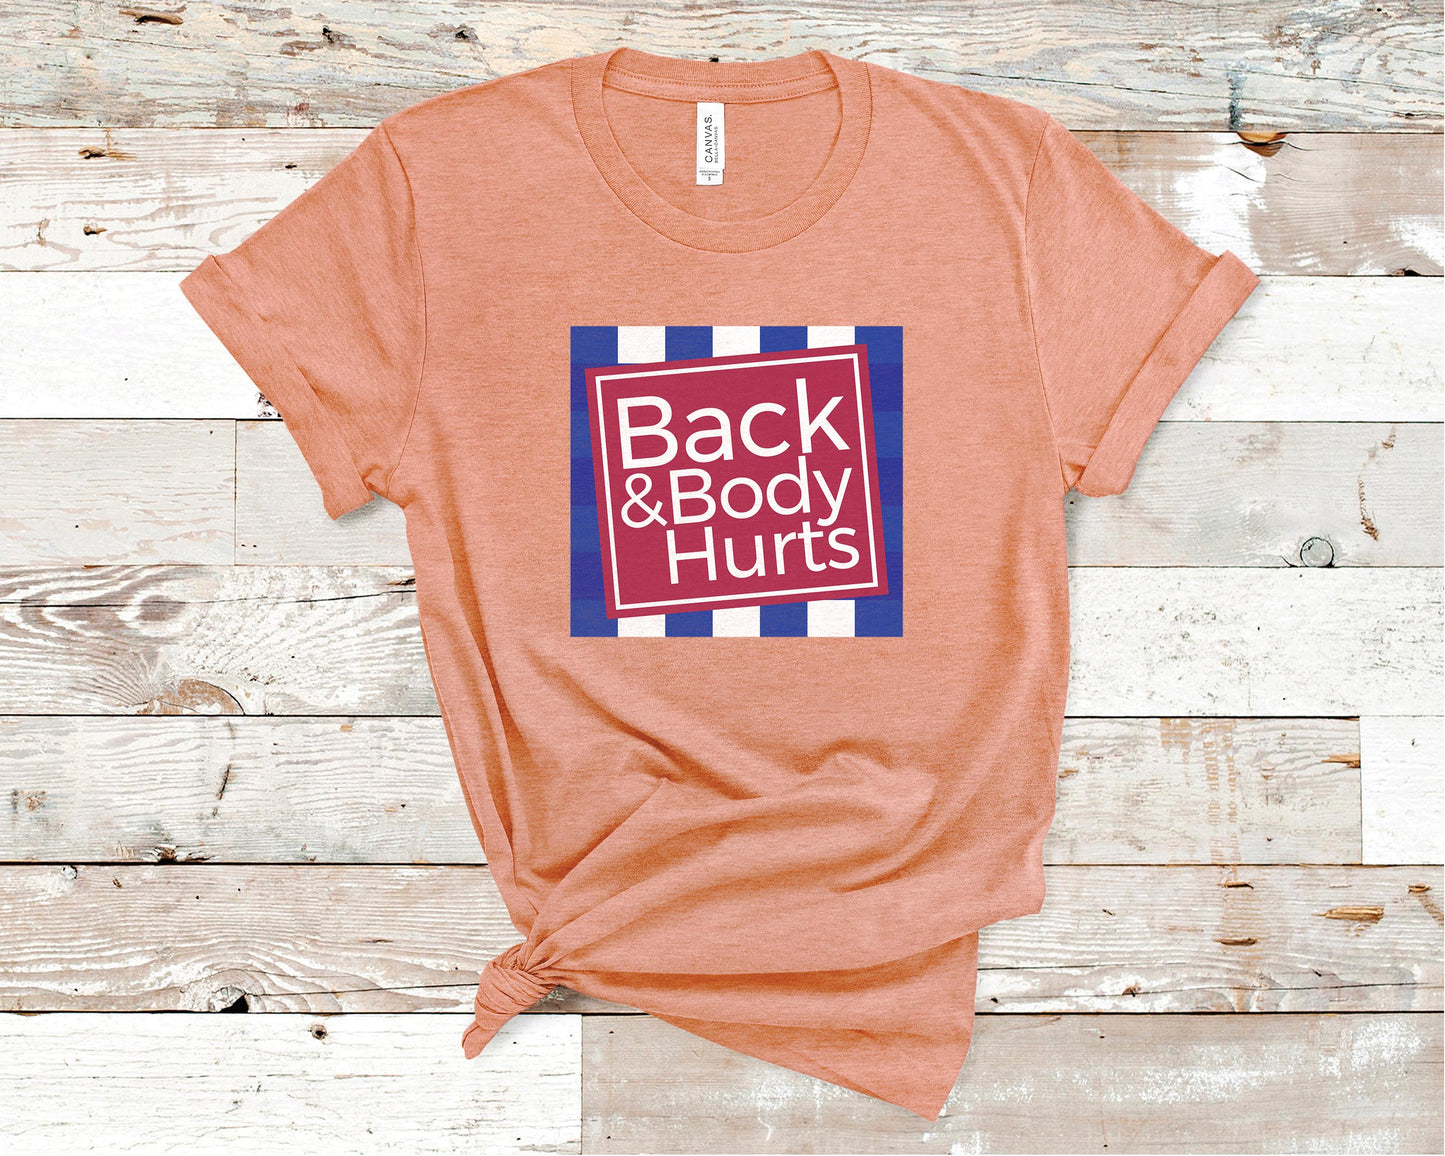 Back & Body Hurts - Fitness